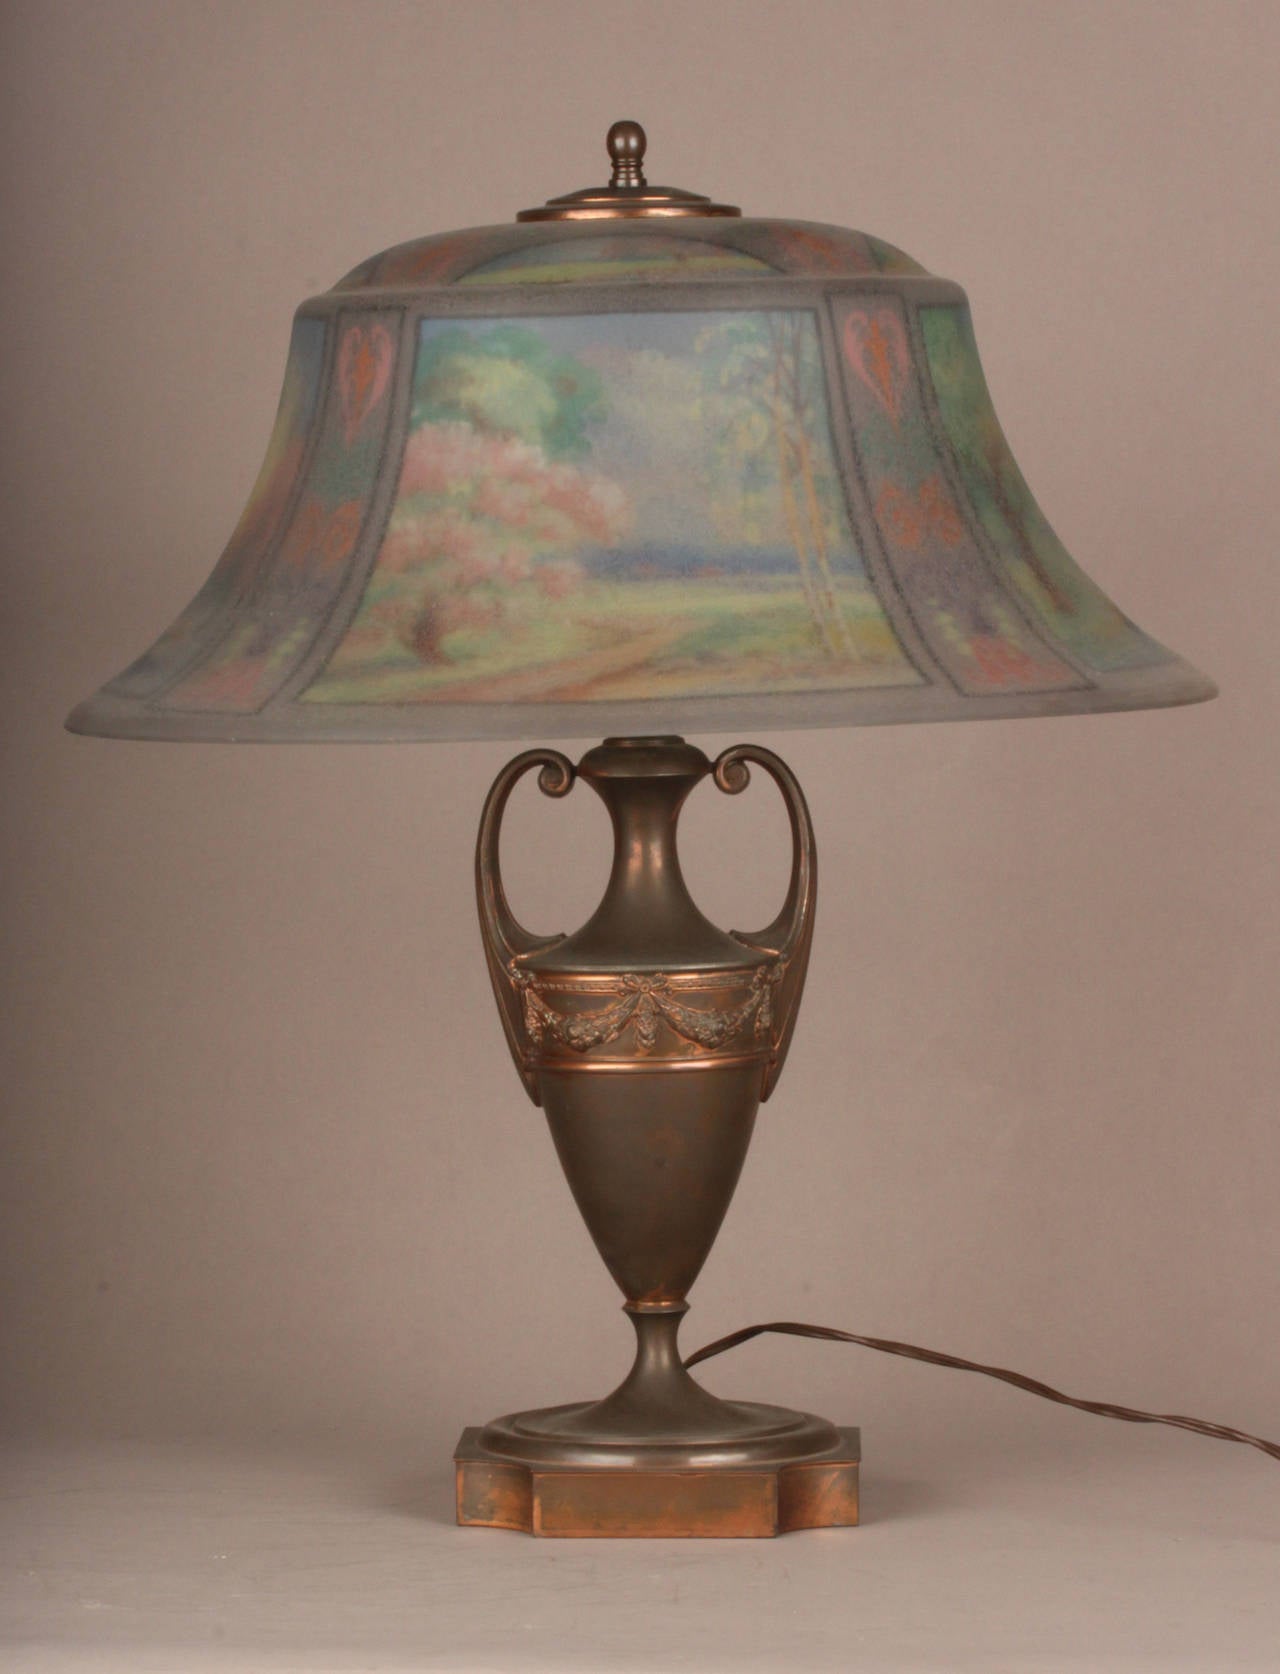 American Pairpoint Reverse Painted Art Nouveau Lamp Depicting the Four Seasons